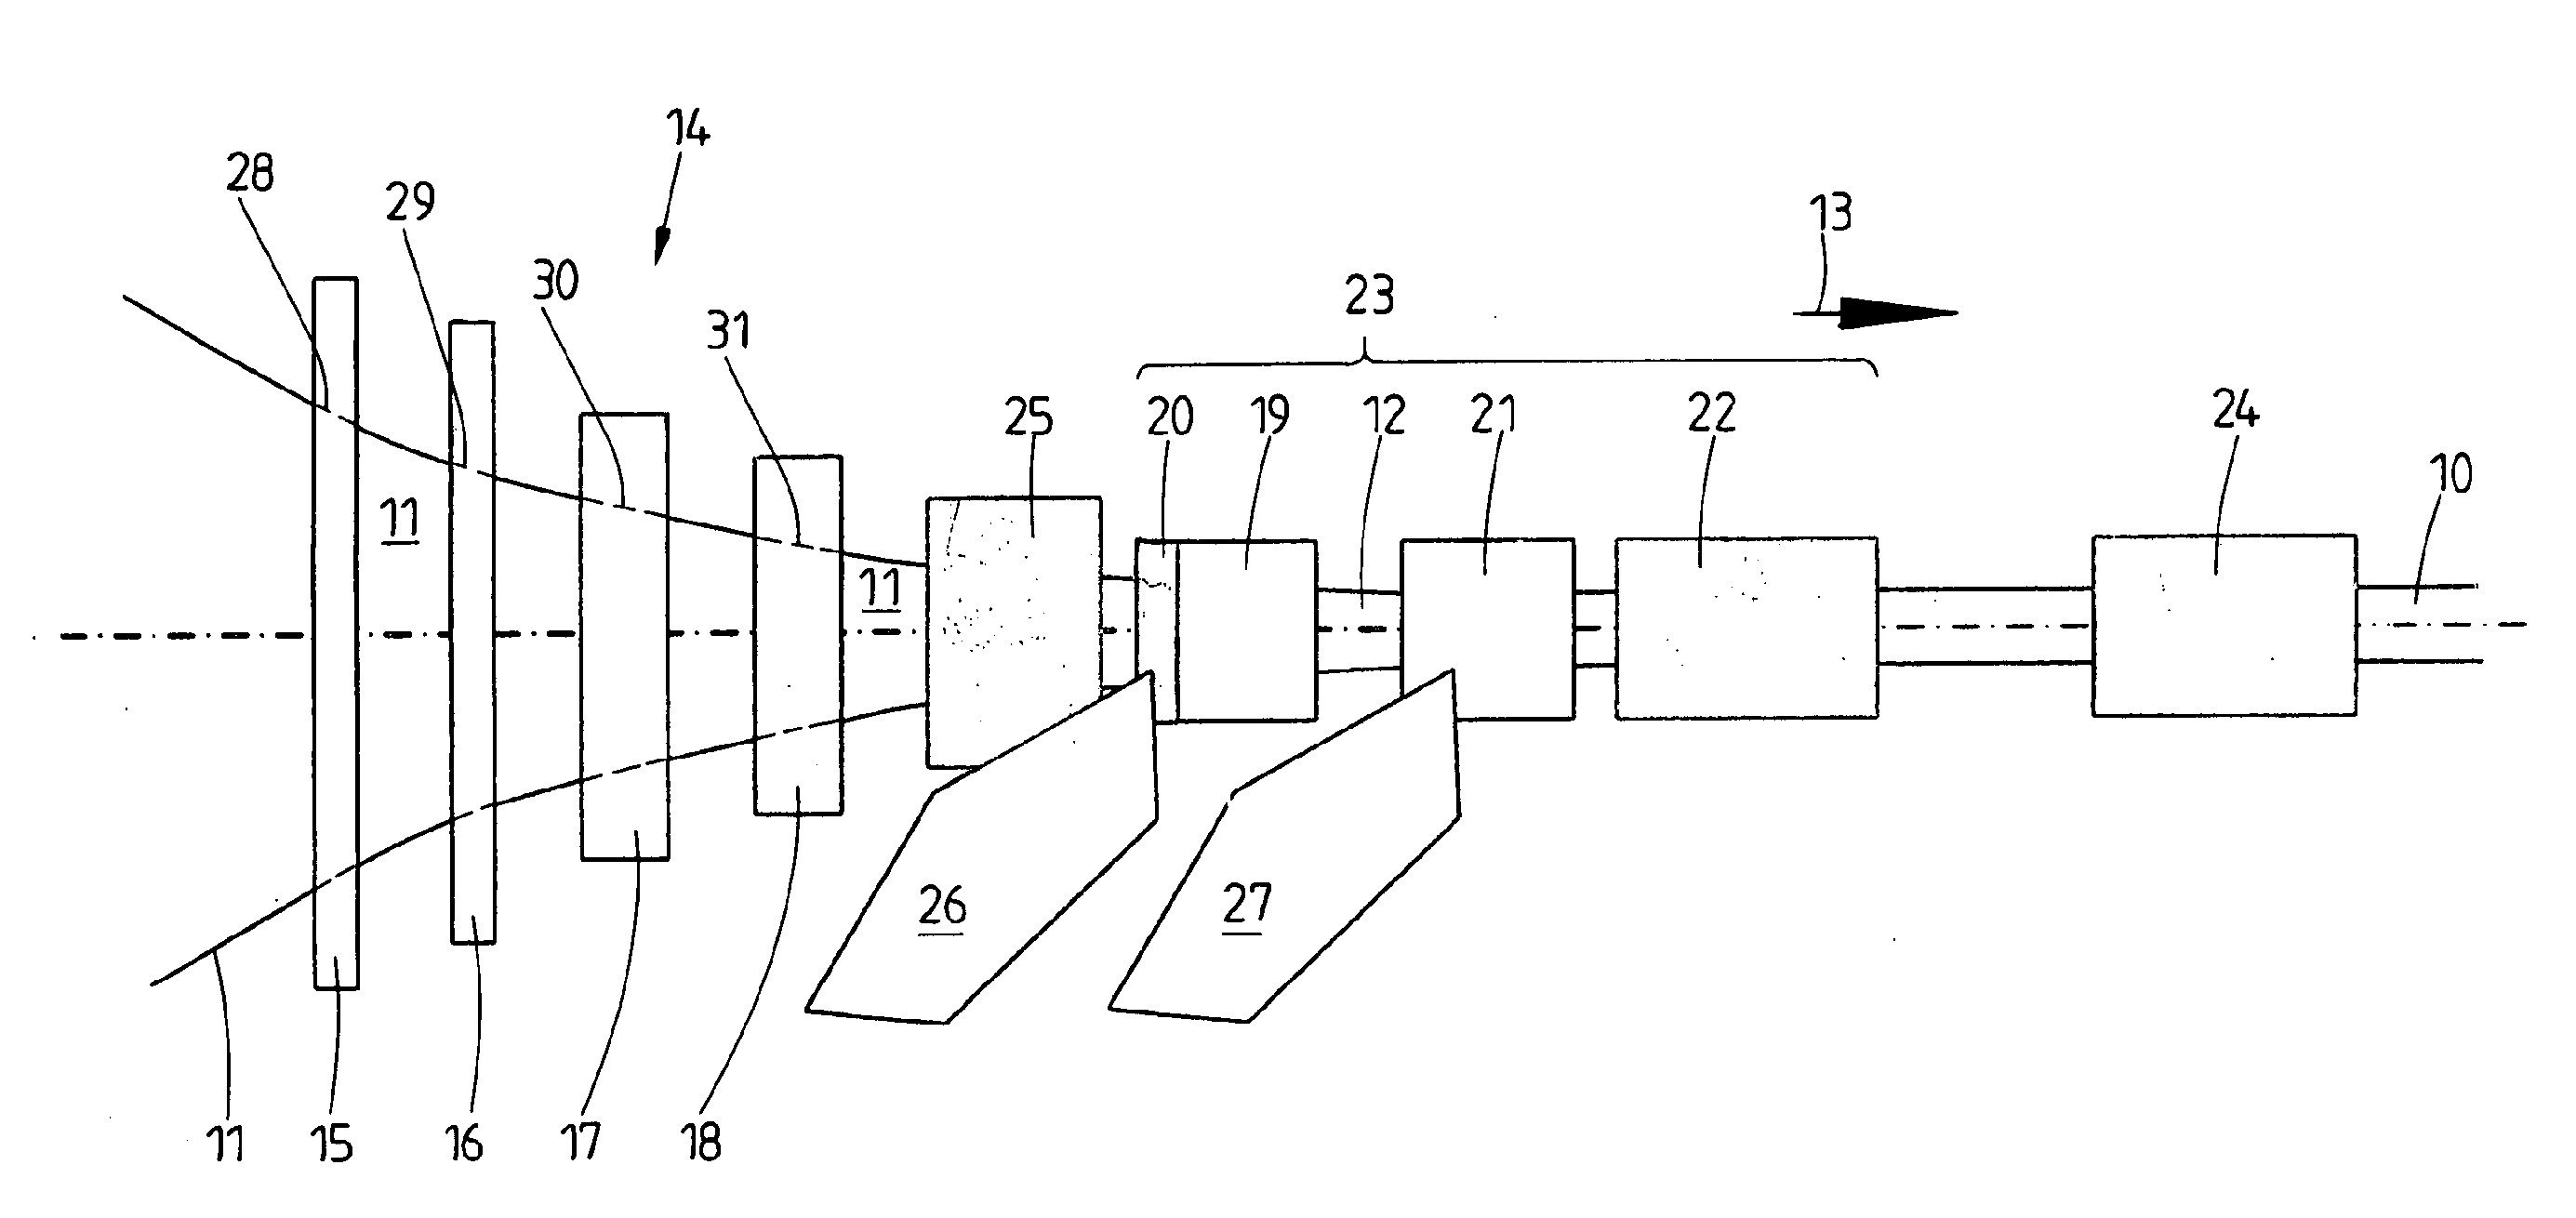 Method and apparatus for producing a plastic profile having a reinforcement